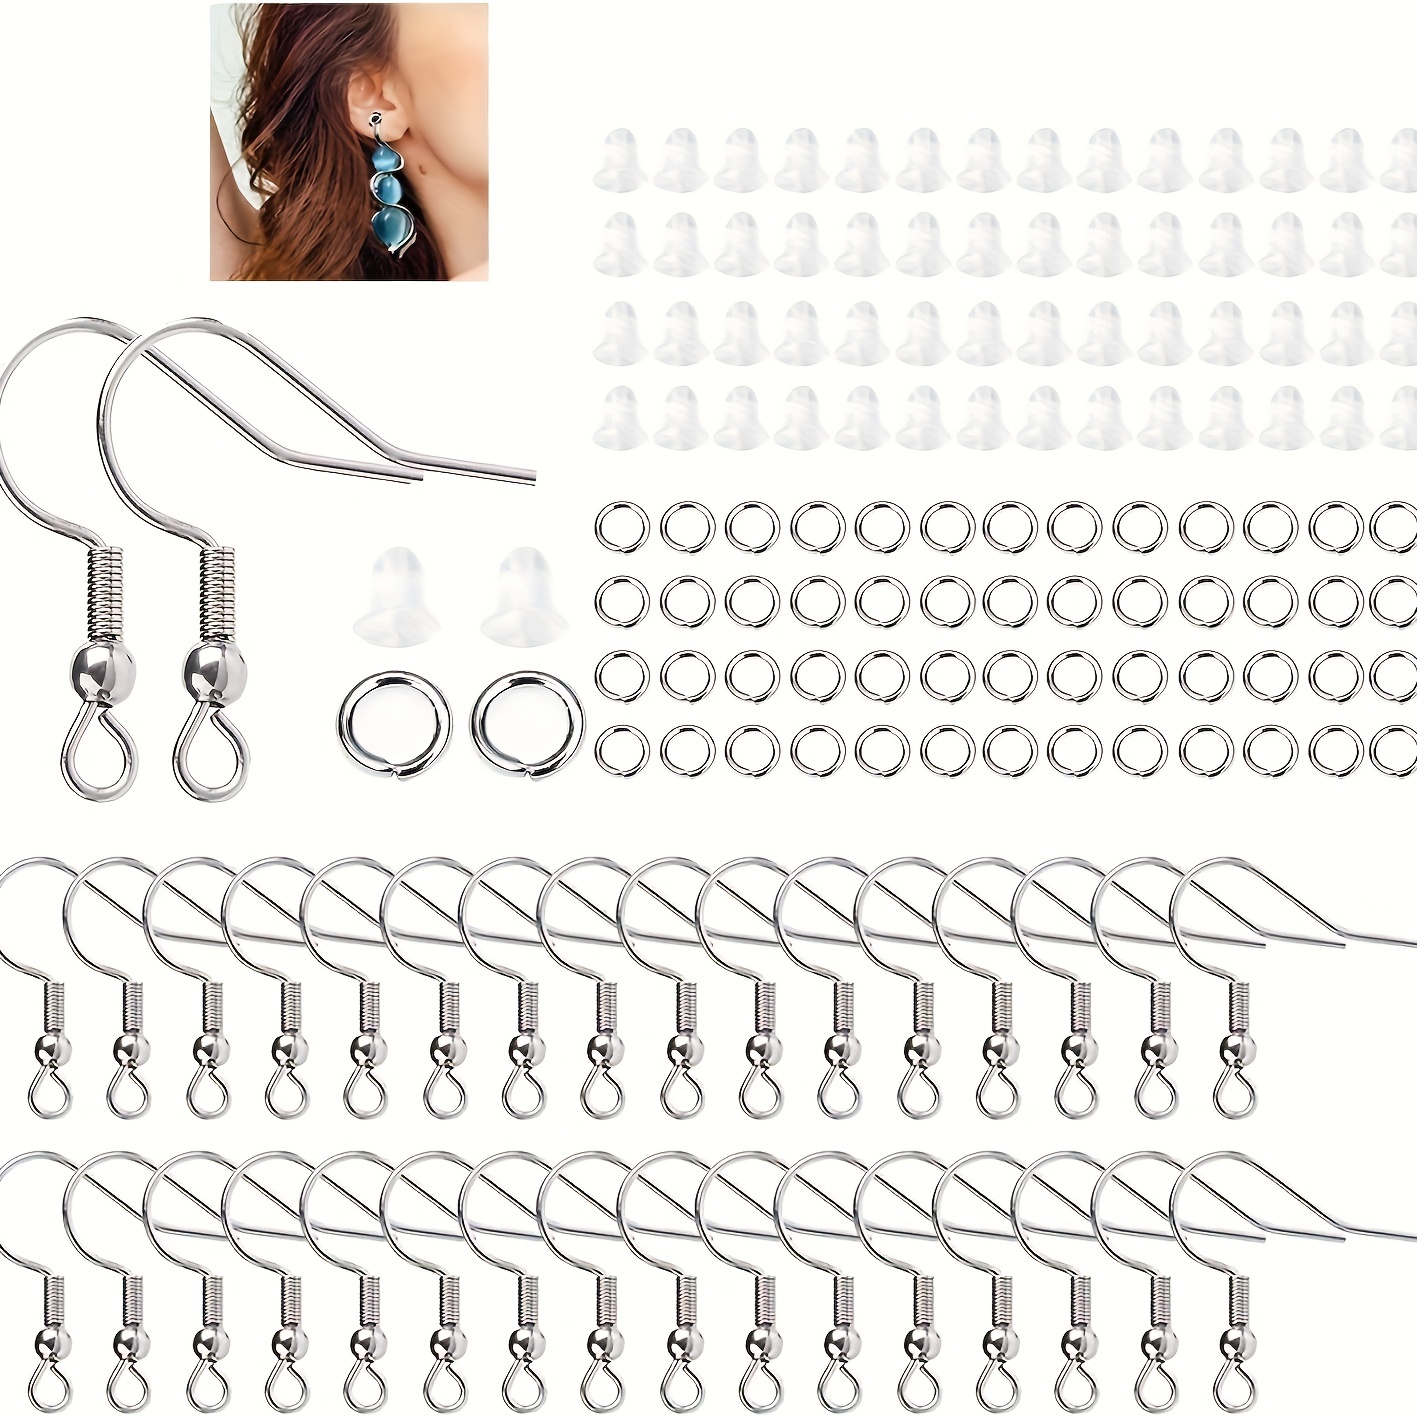 925 Sterling Silver Earring Hooks 120 PCS/60 Pairs, Ear Wires Fish Hooks,  Hypo-allergenic Jewelry Findings Parts with 120 PCS Clear Silicone Earring